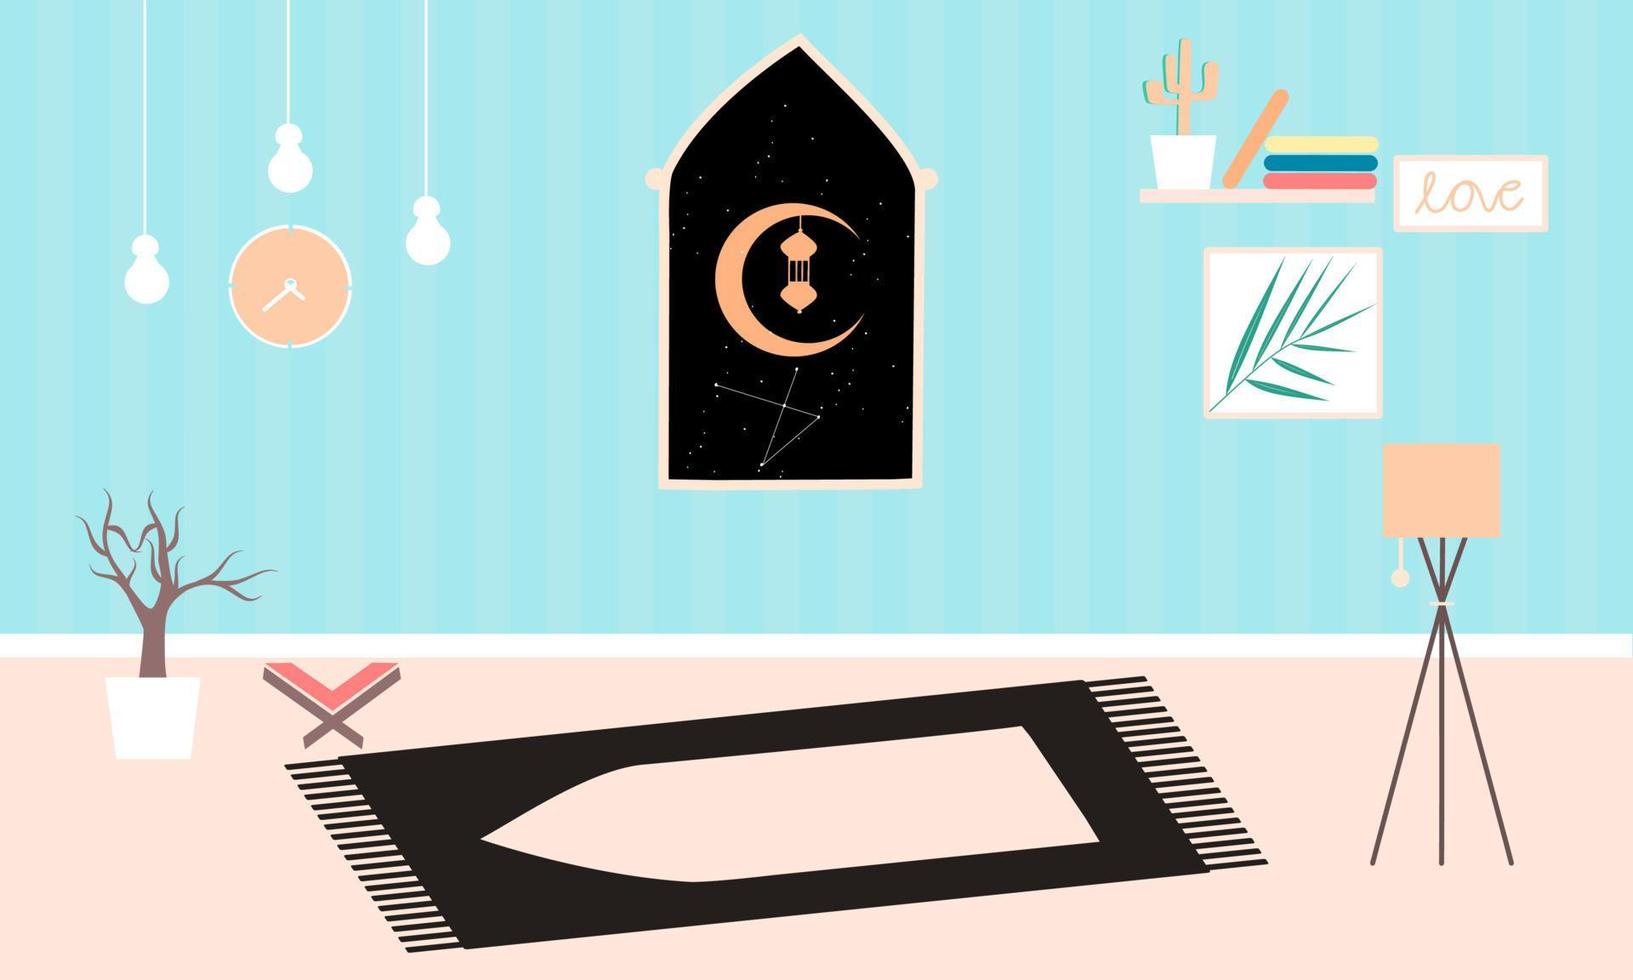 Pray and worship in room at home for Ramadan concept on landing page. Home decor clock, pot, photo, lamp, window, book and holy Quran. Suitable for background, footage animation, motion graphic vector